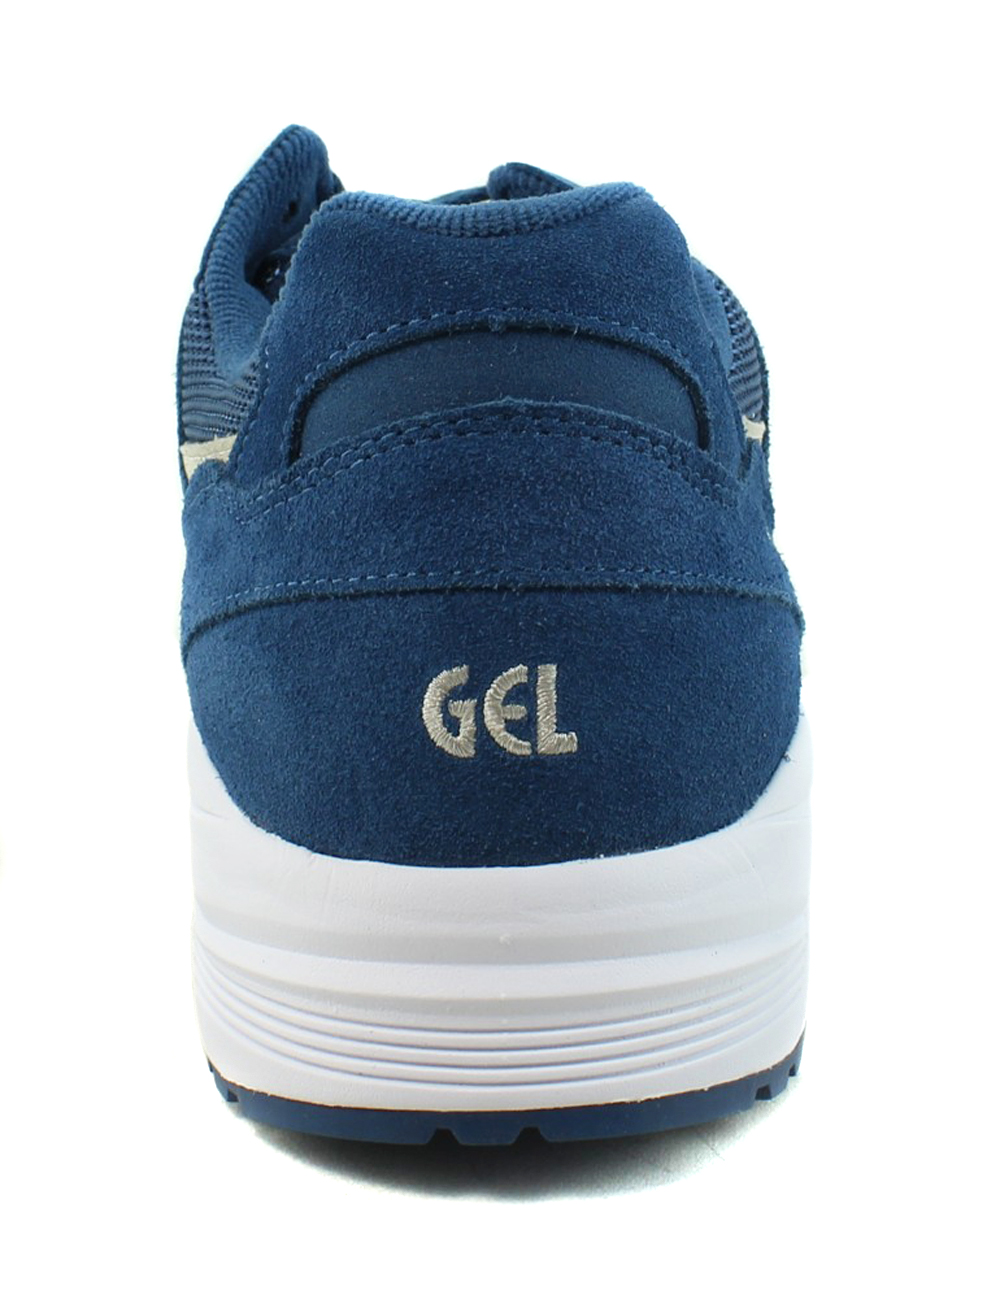 ASICS Mens Gel-Lique Suede Running Casual Sneaker Shoes - image 3 of 4